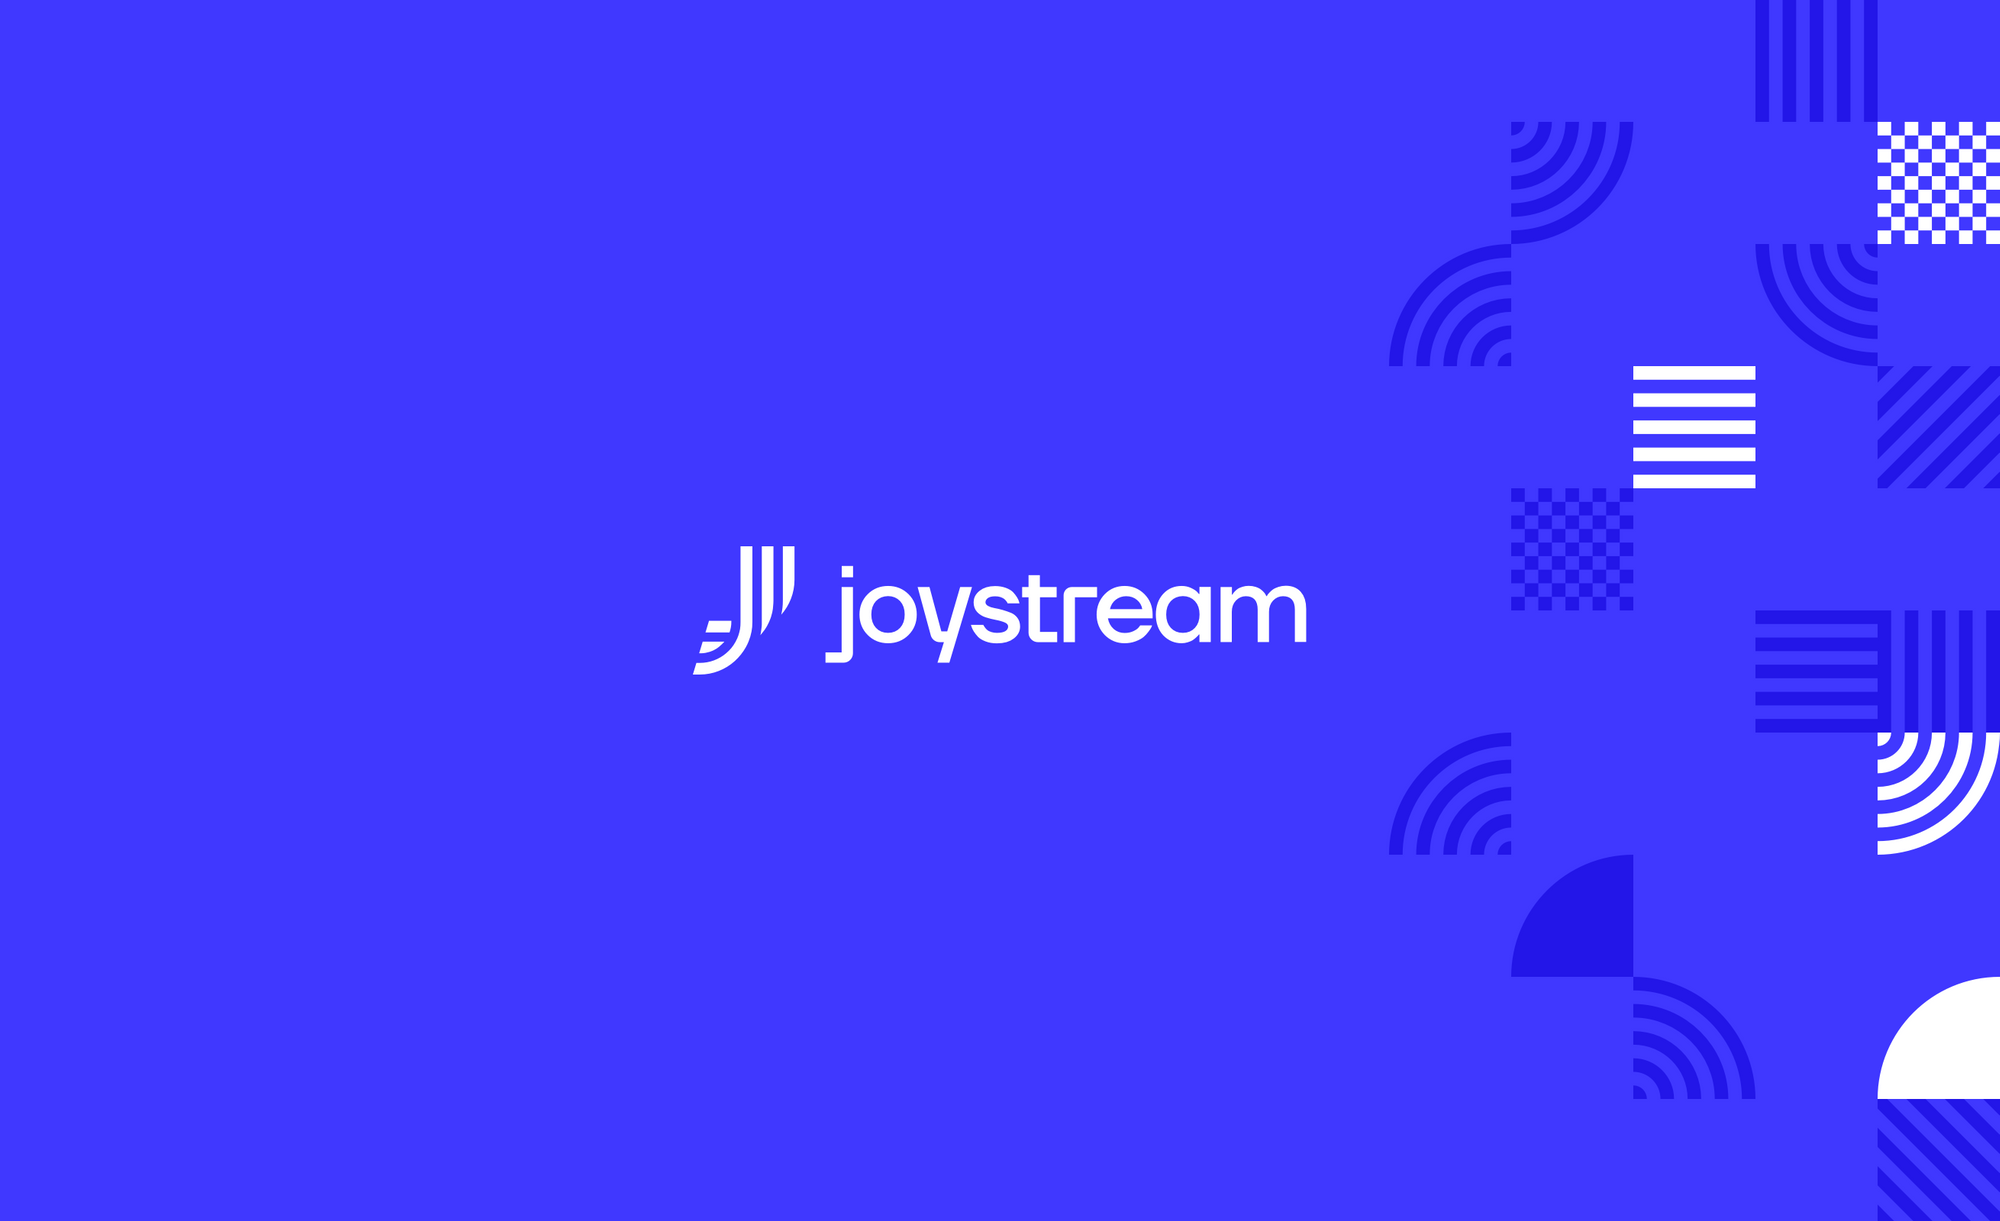 Welcome to the new Joystream blog